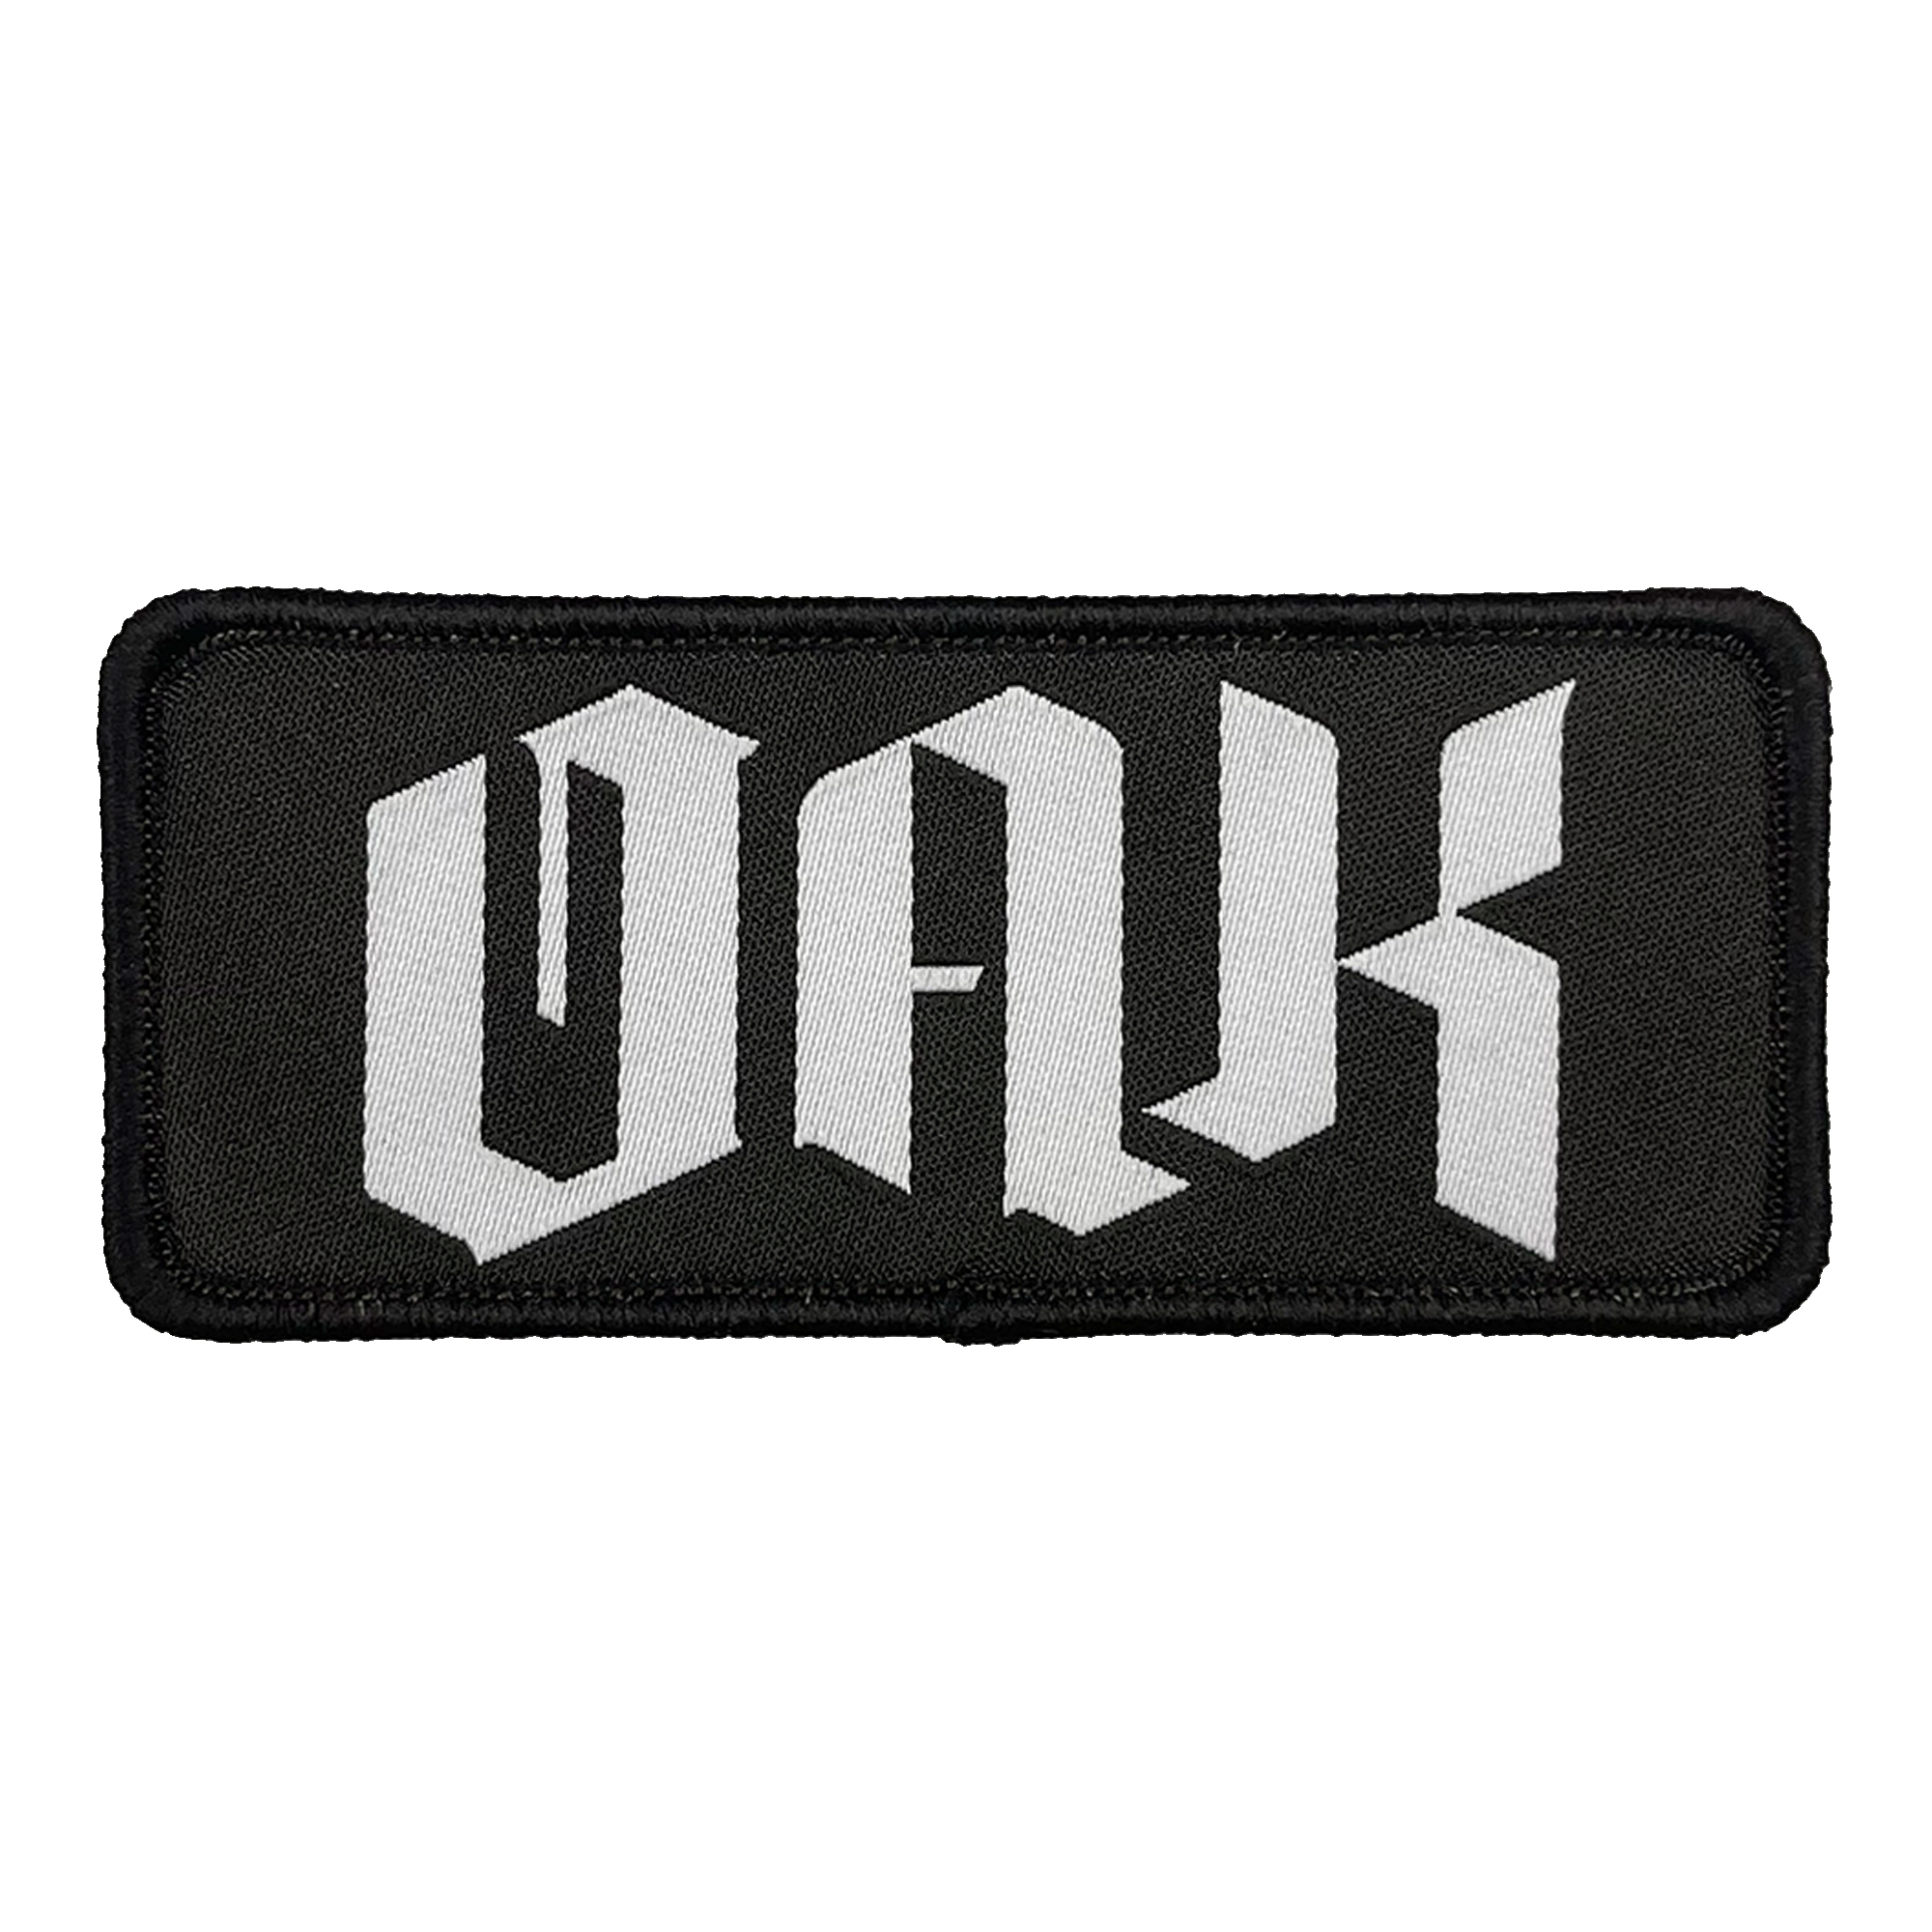 Woven black iron-on patch with white OAK wordmark in drip.